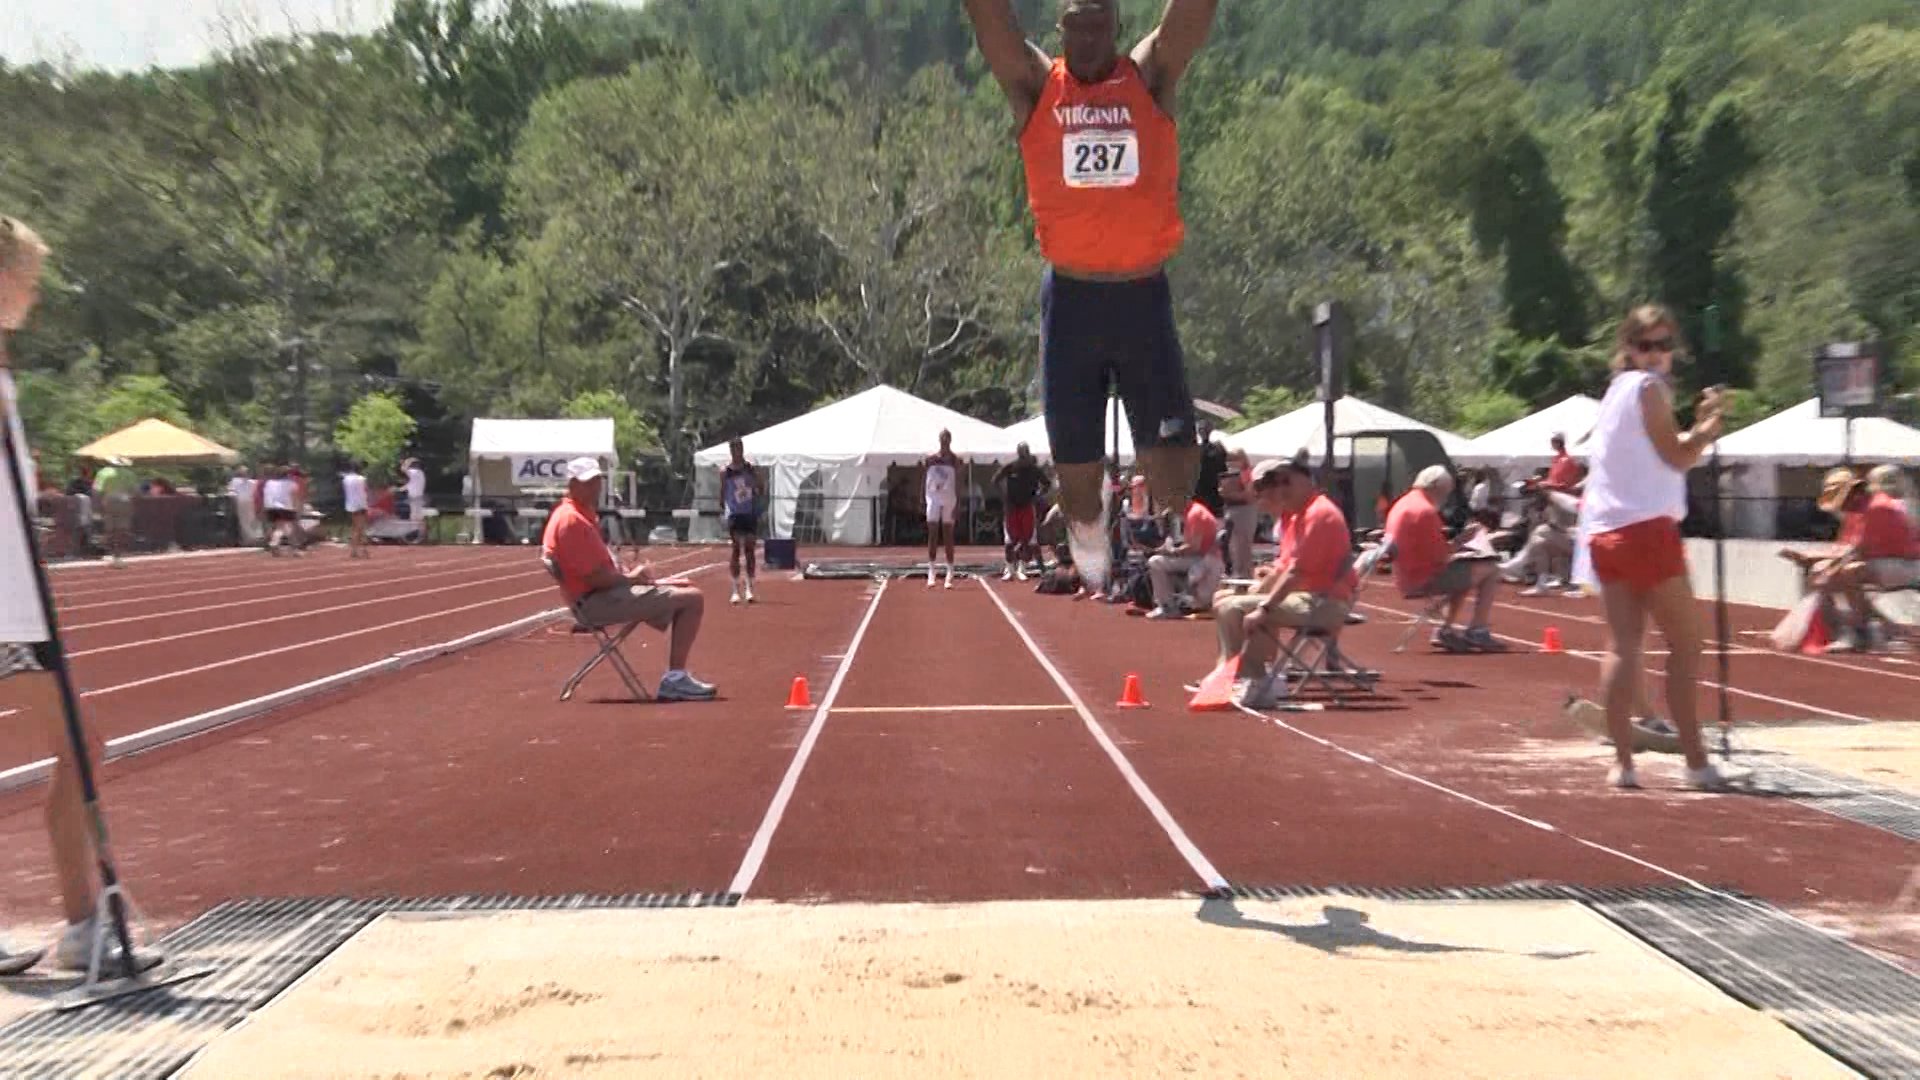 UVA Men's Outdoor Track and Field Ranked #23 - WVIR NBC29 Charlottesville News, Sports ...